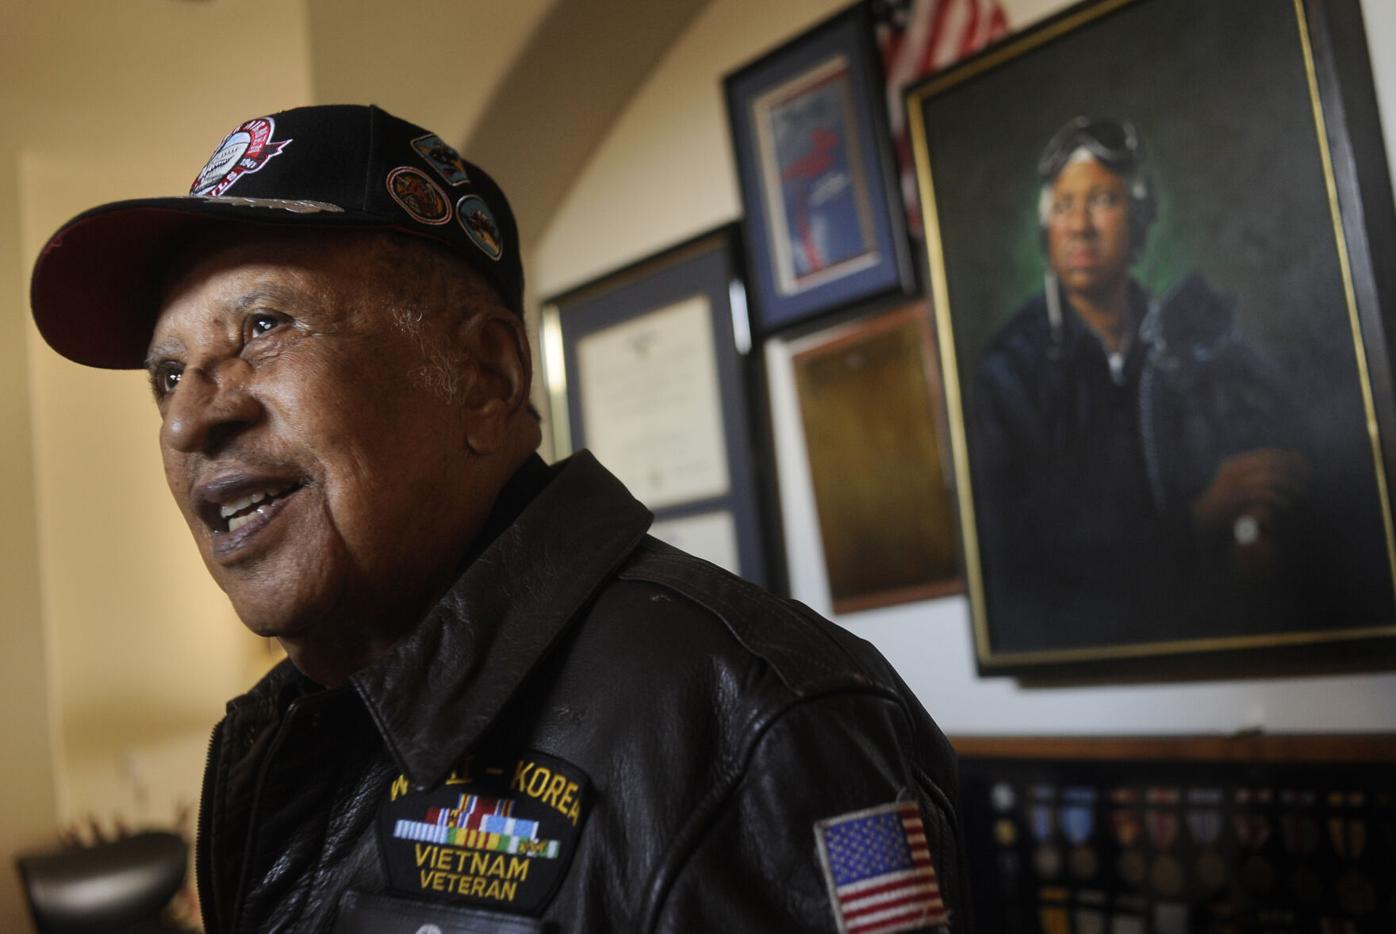 Tuskegee Airmen knew true meaning of sacrifice